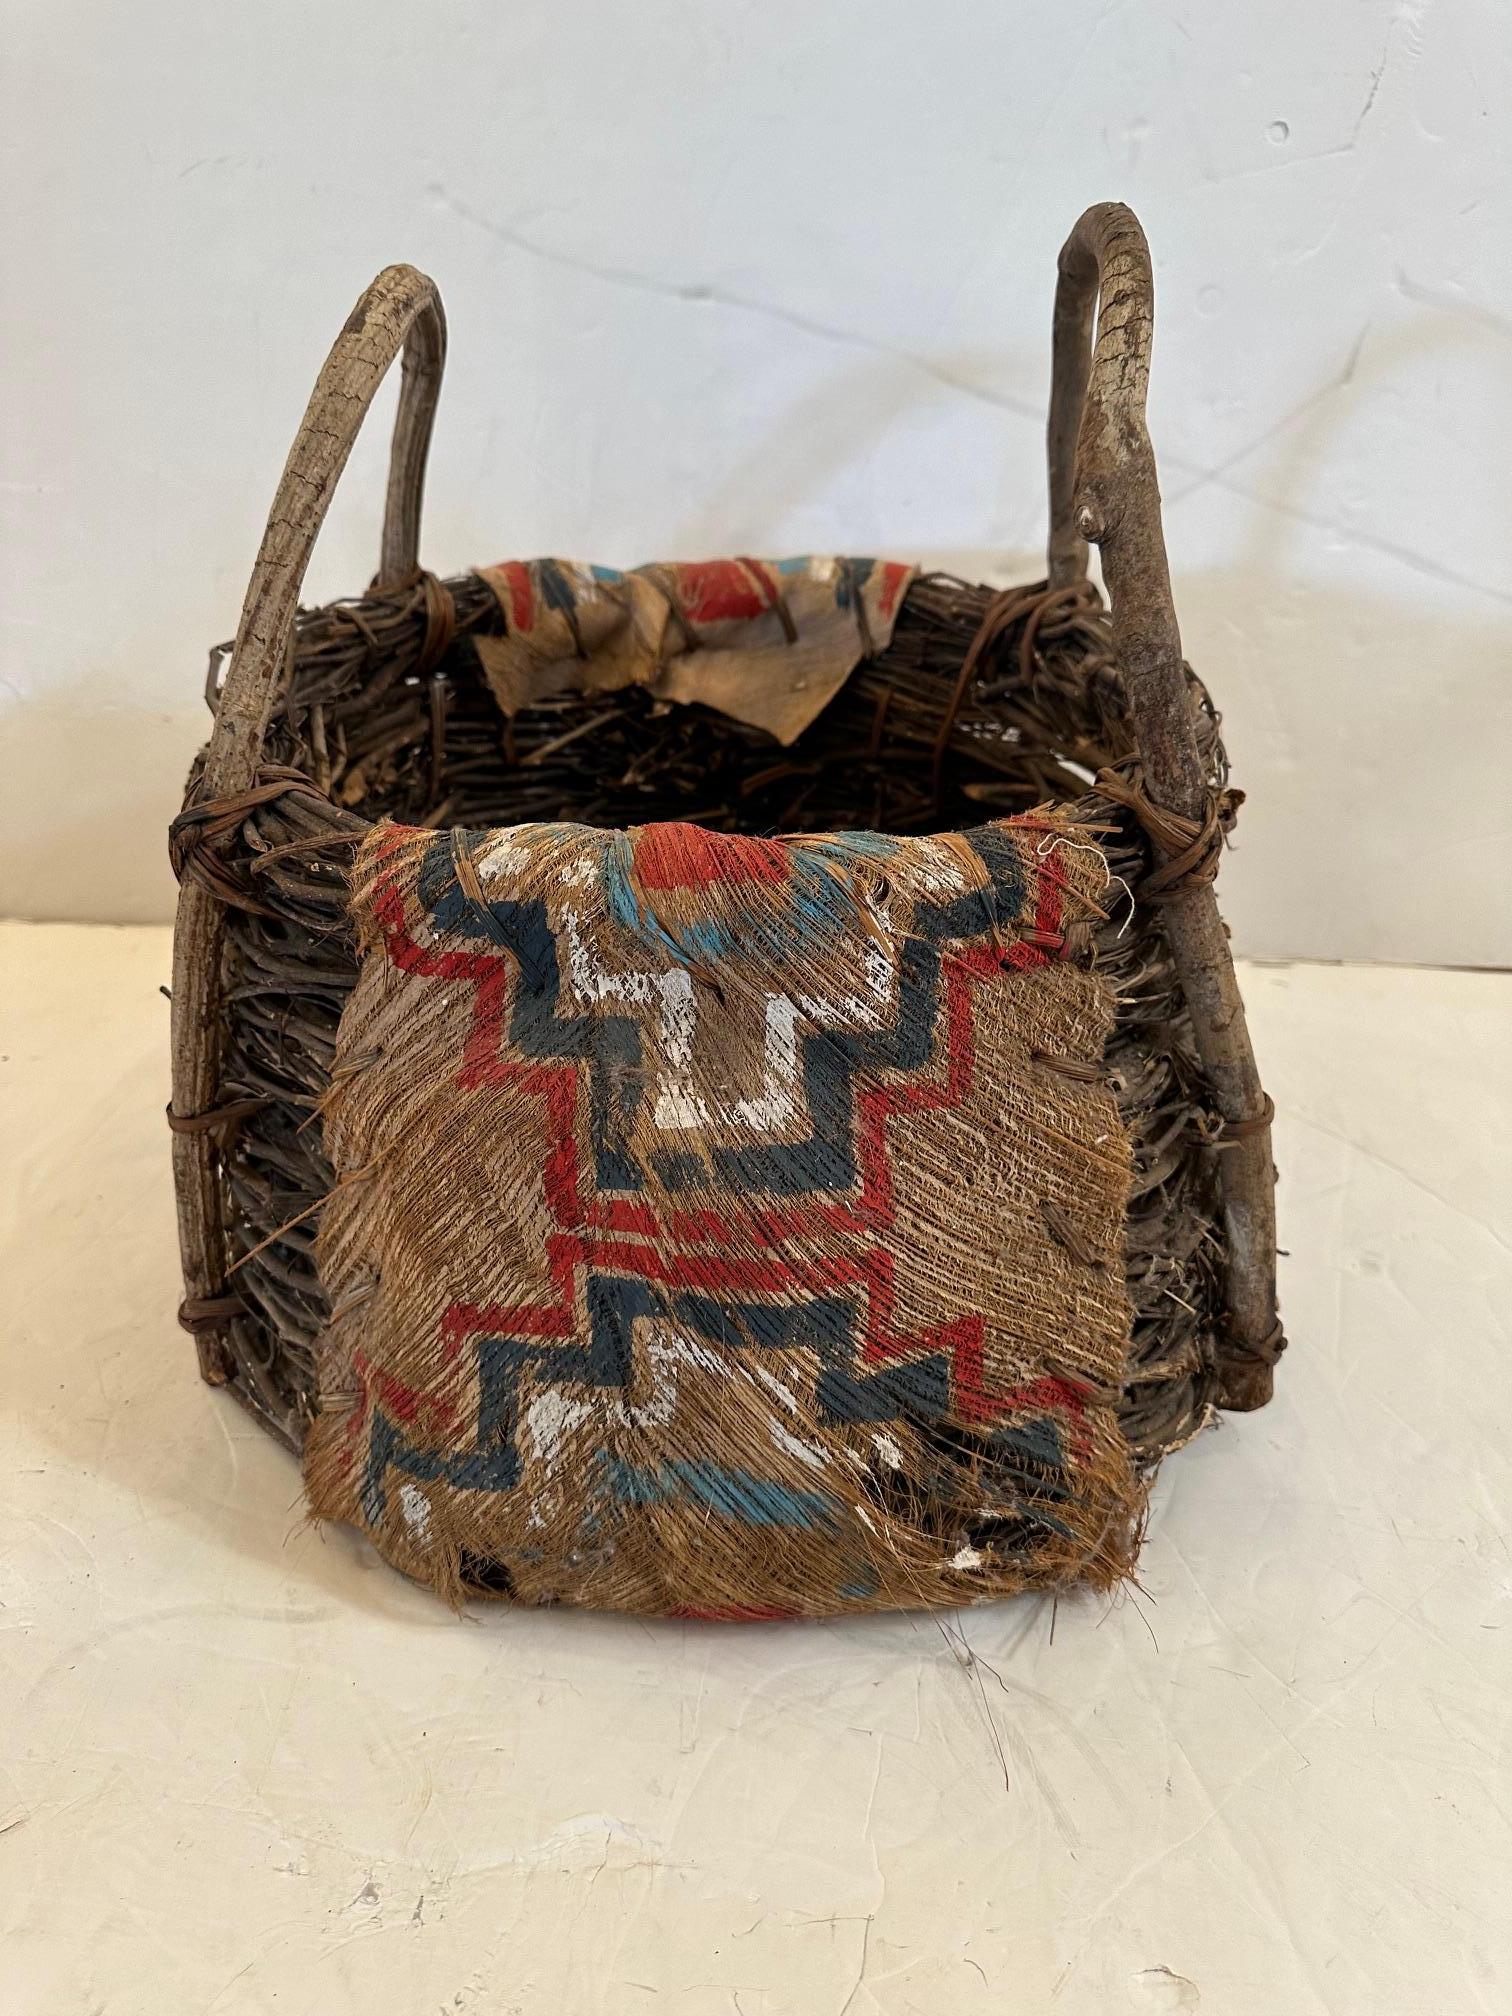 Stunning antique hand crafted Native American painted bark and twig basket having rustic bentwood handles.
Note:  Pair is available.